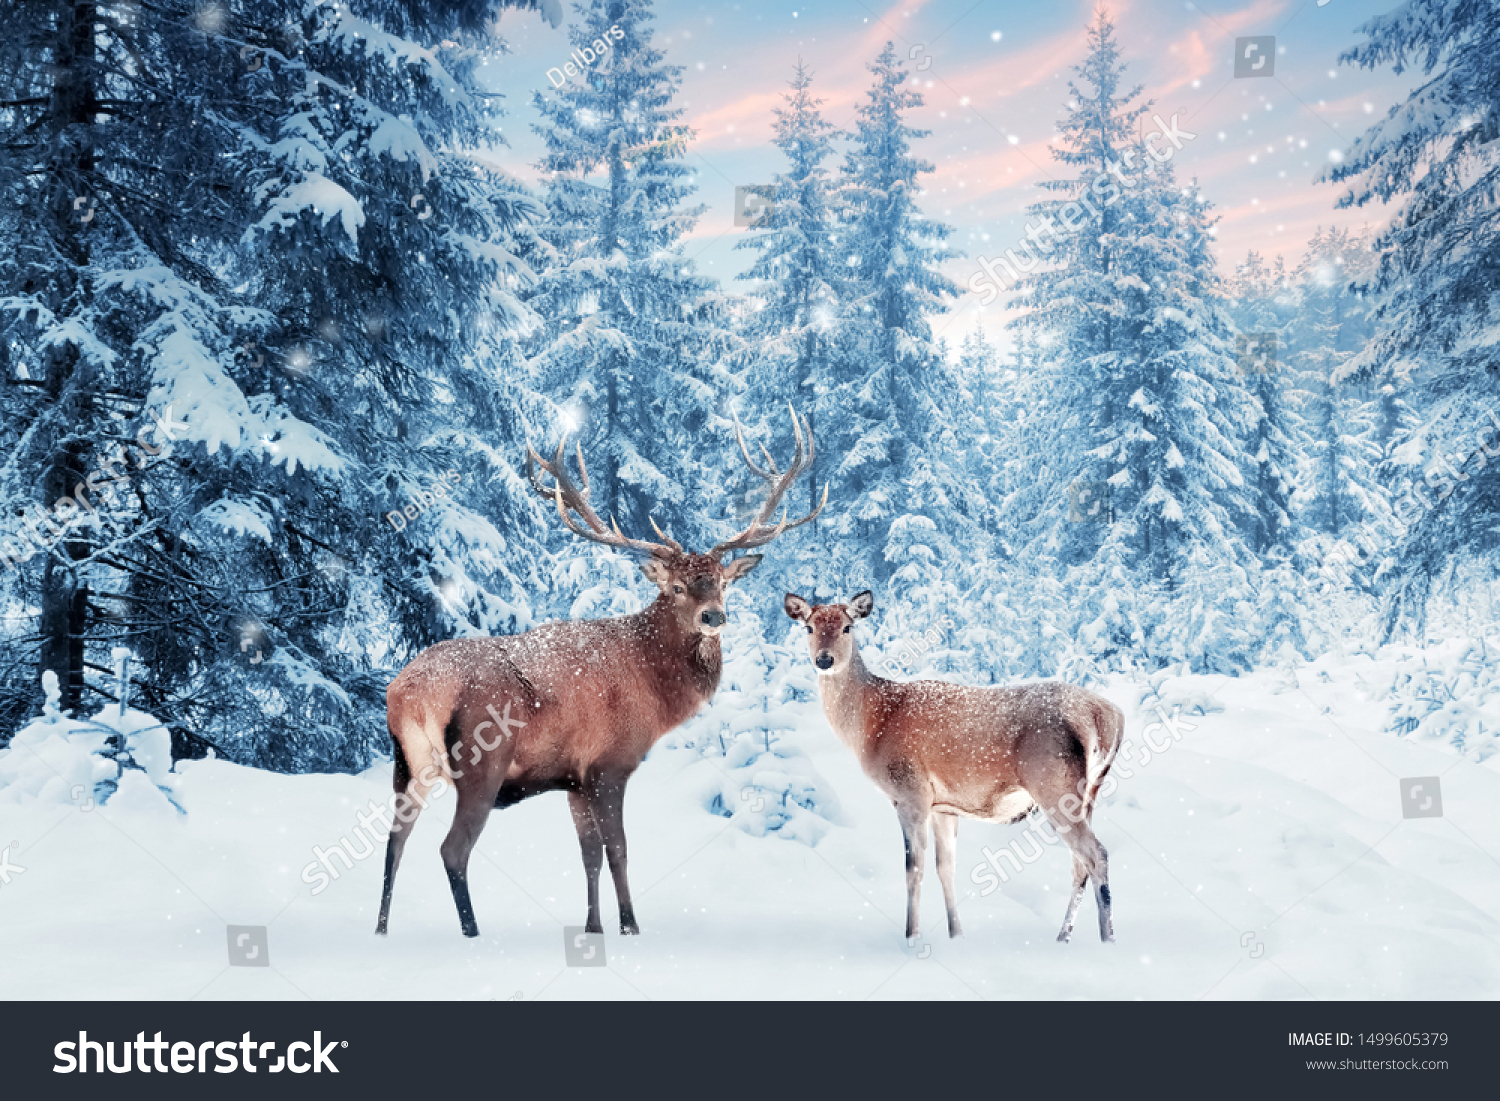 Family of noble deer in a snowy winter forest at sunset. Christmas fantasy image in blue and white color. Pink clouds. Snowing. Winter wonderland. #1499605379